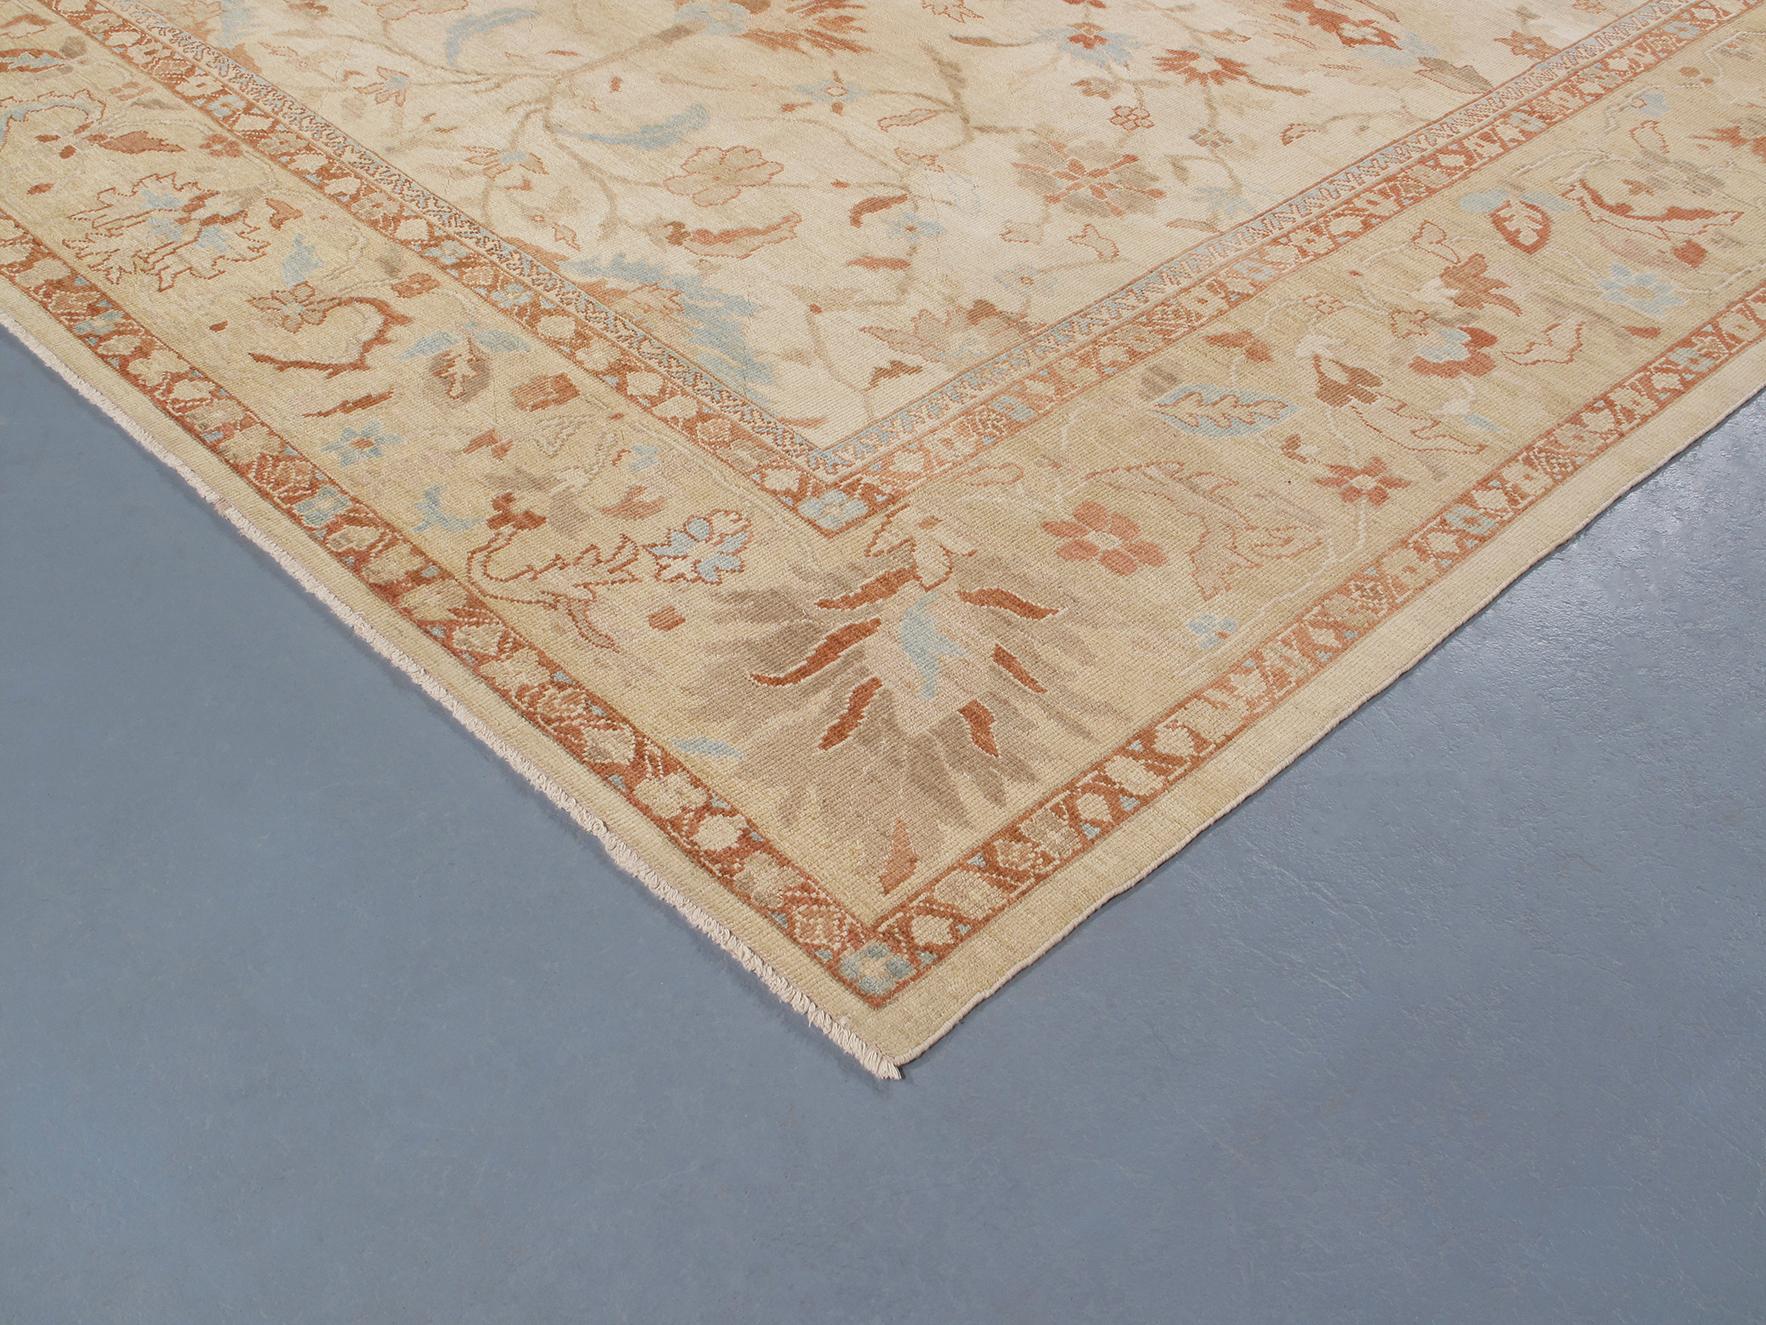 Contemporary Original Persian Ziegler Sultanabad Hand Knotted Rug in Ivory and Gold Tones For Sale